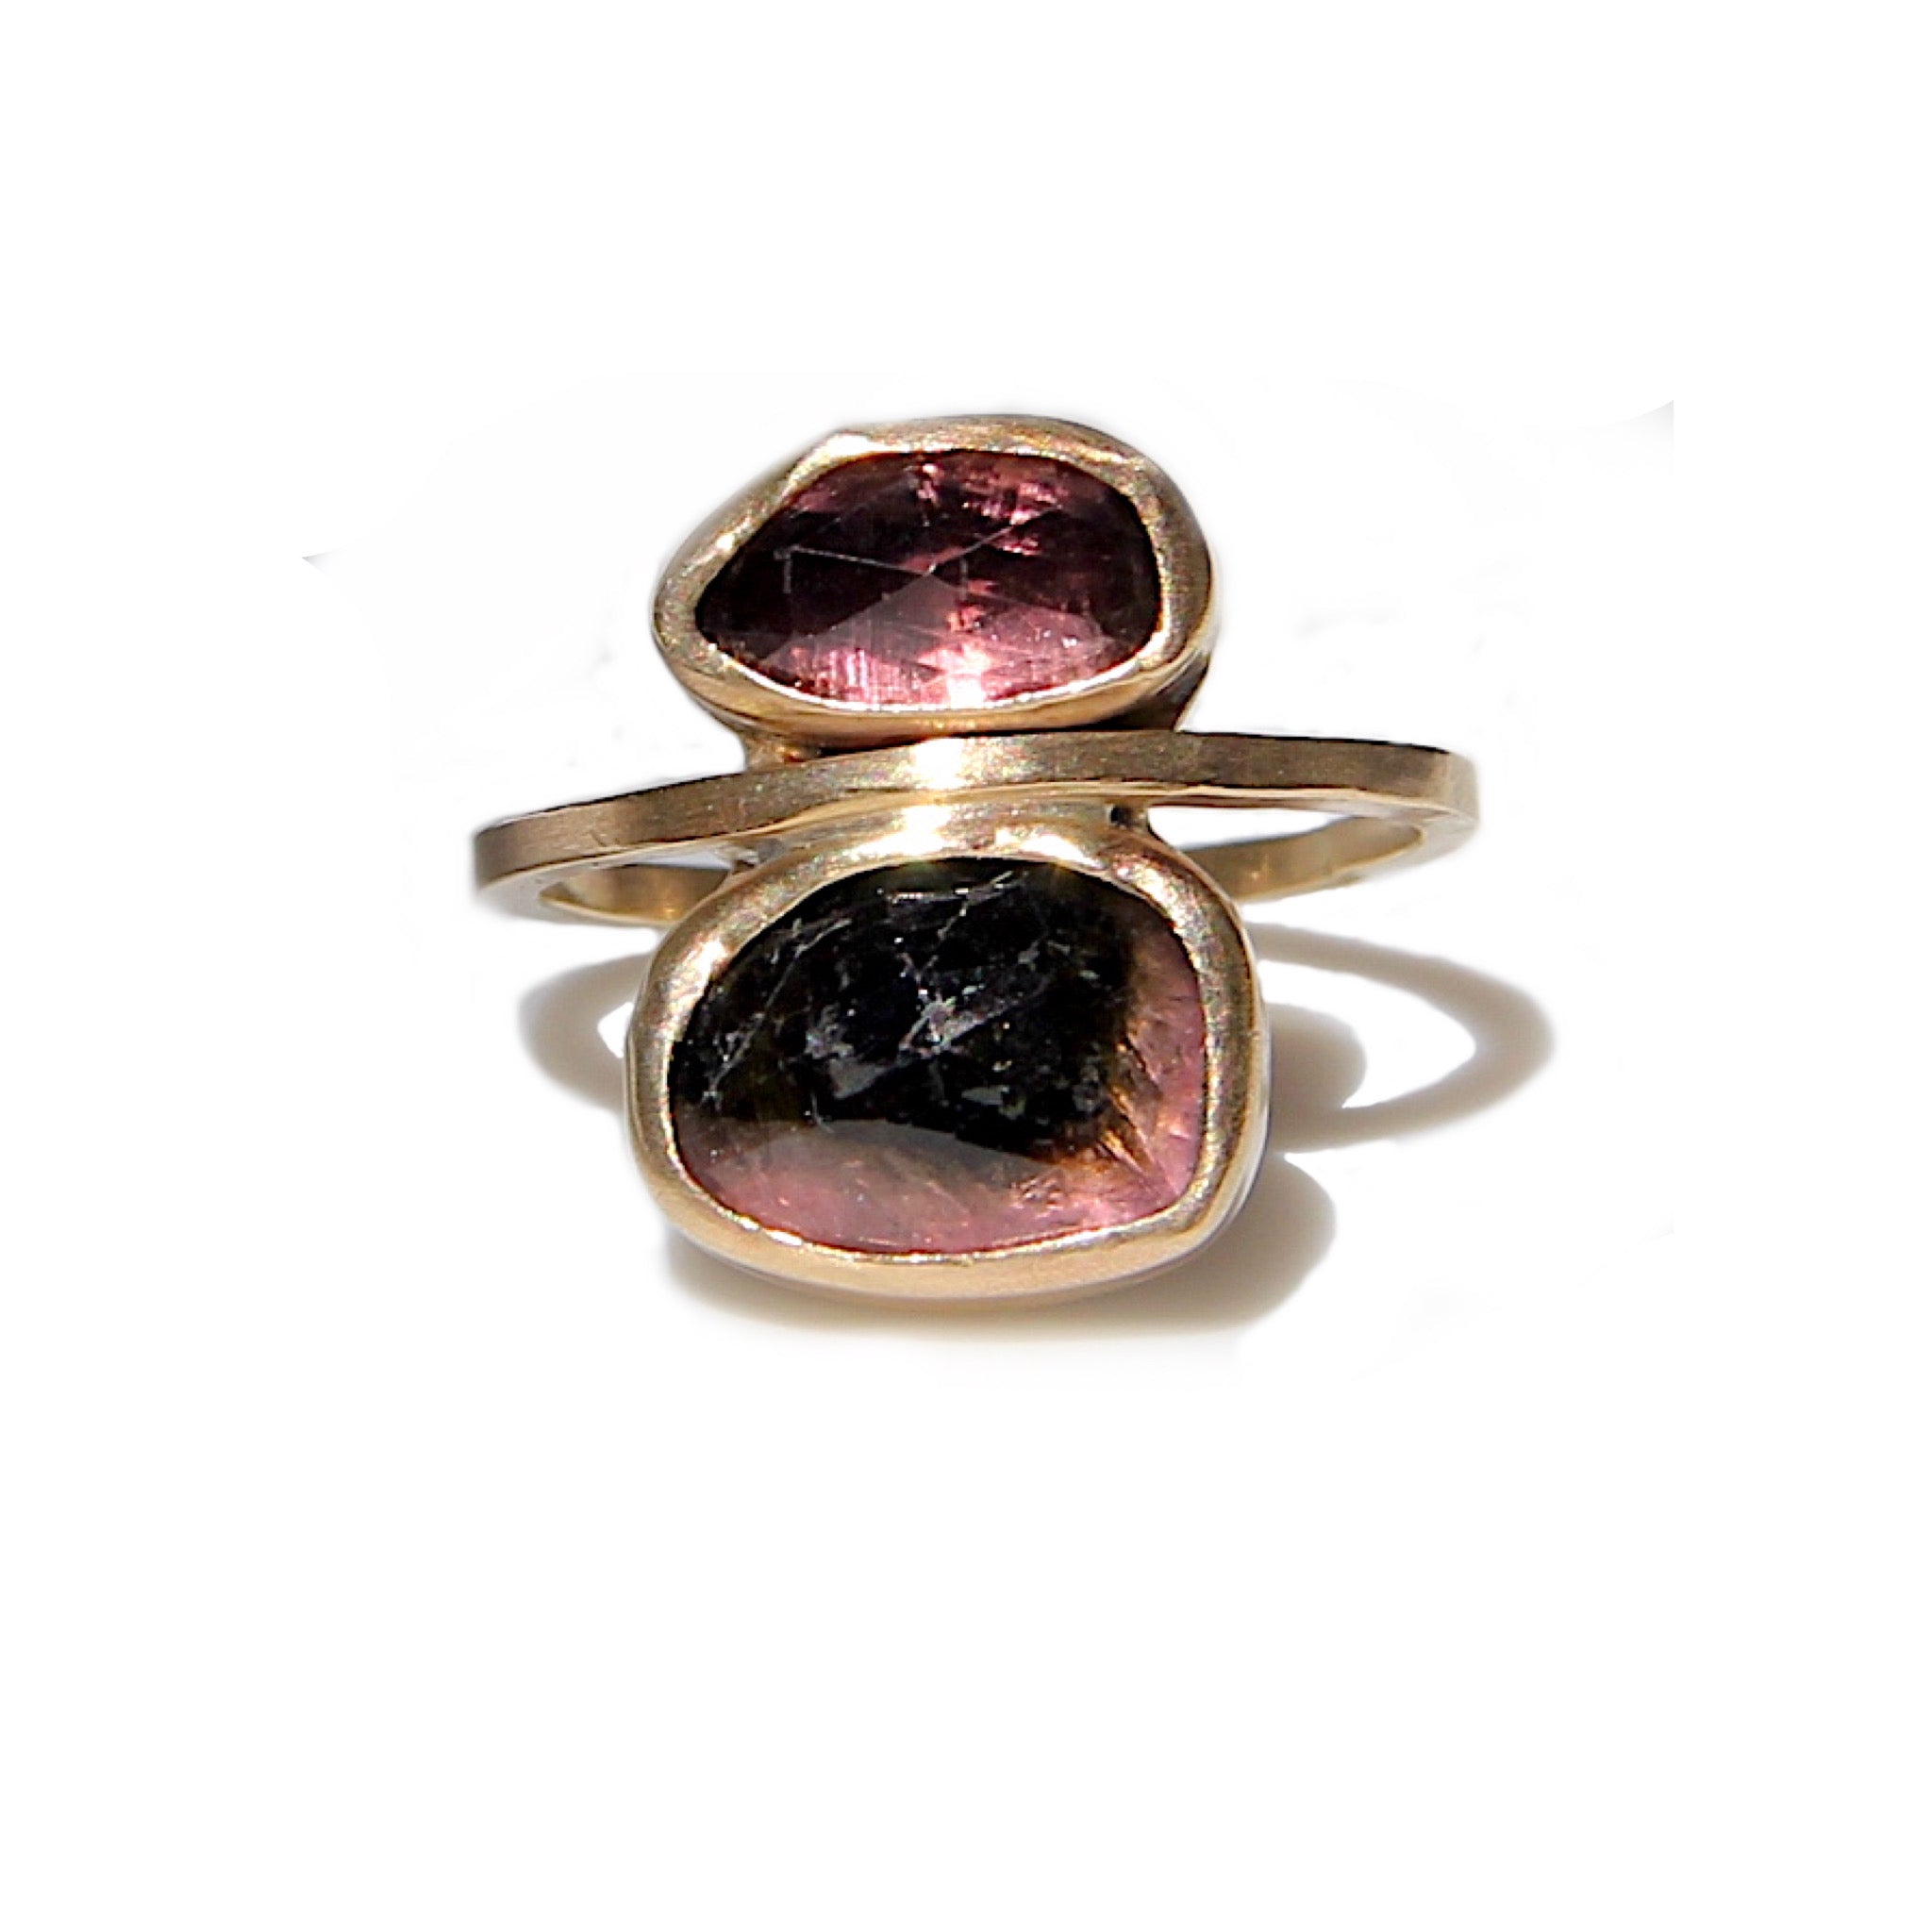 Double Tourmaline stack Ring